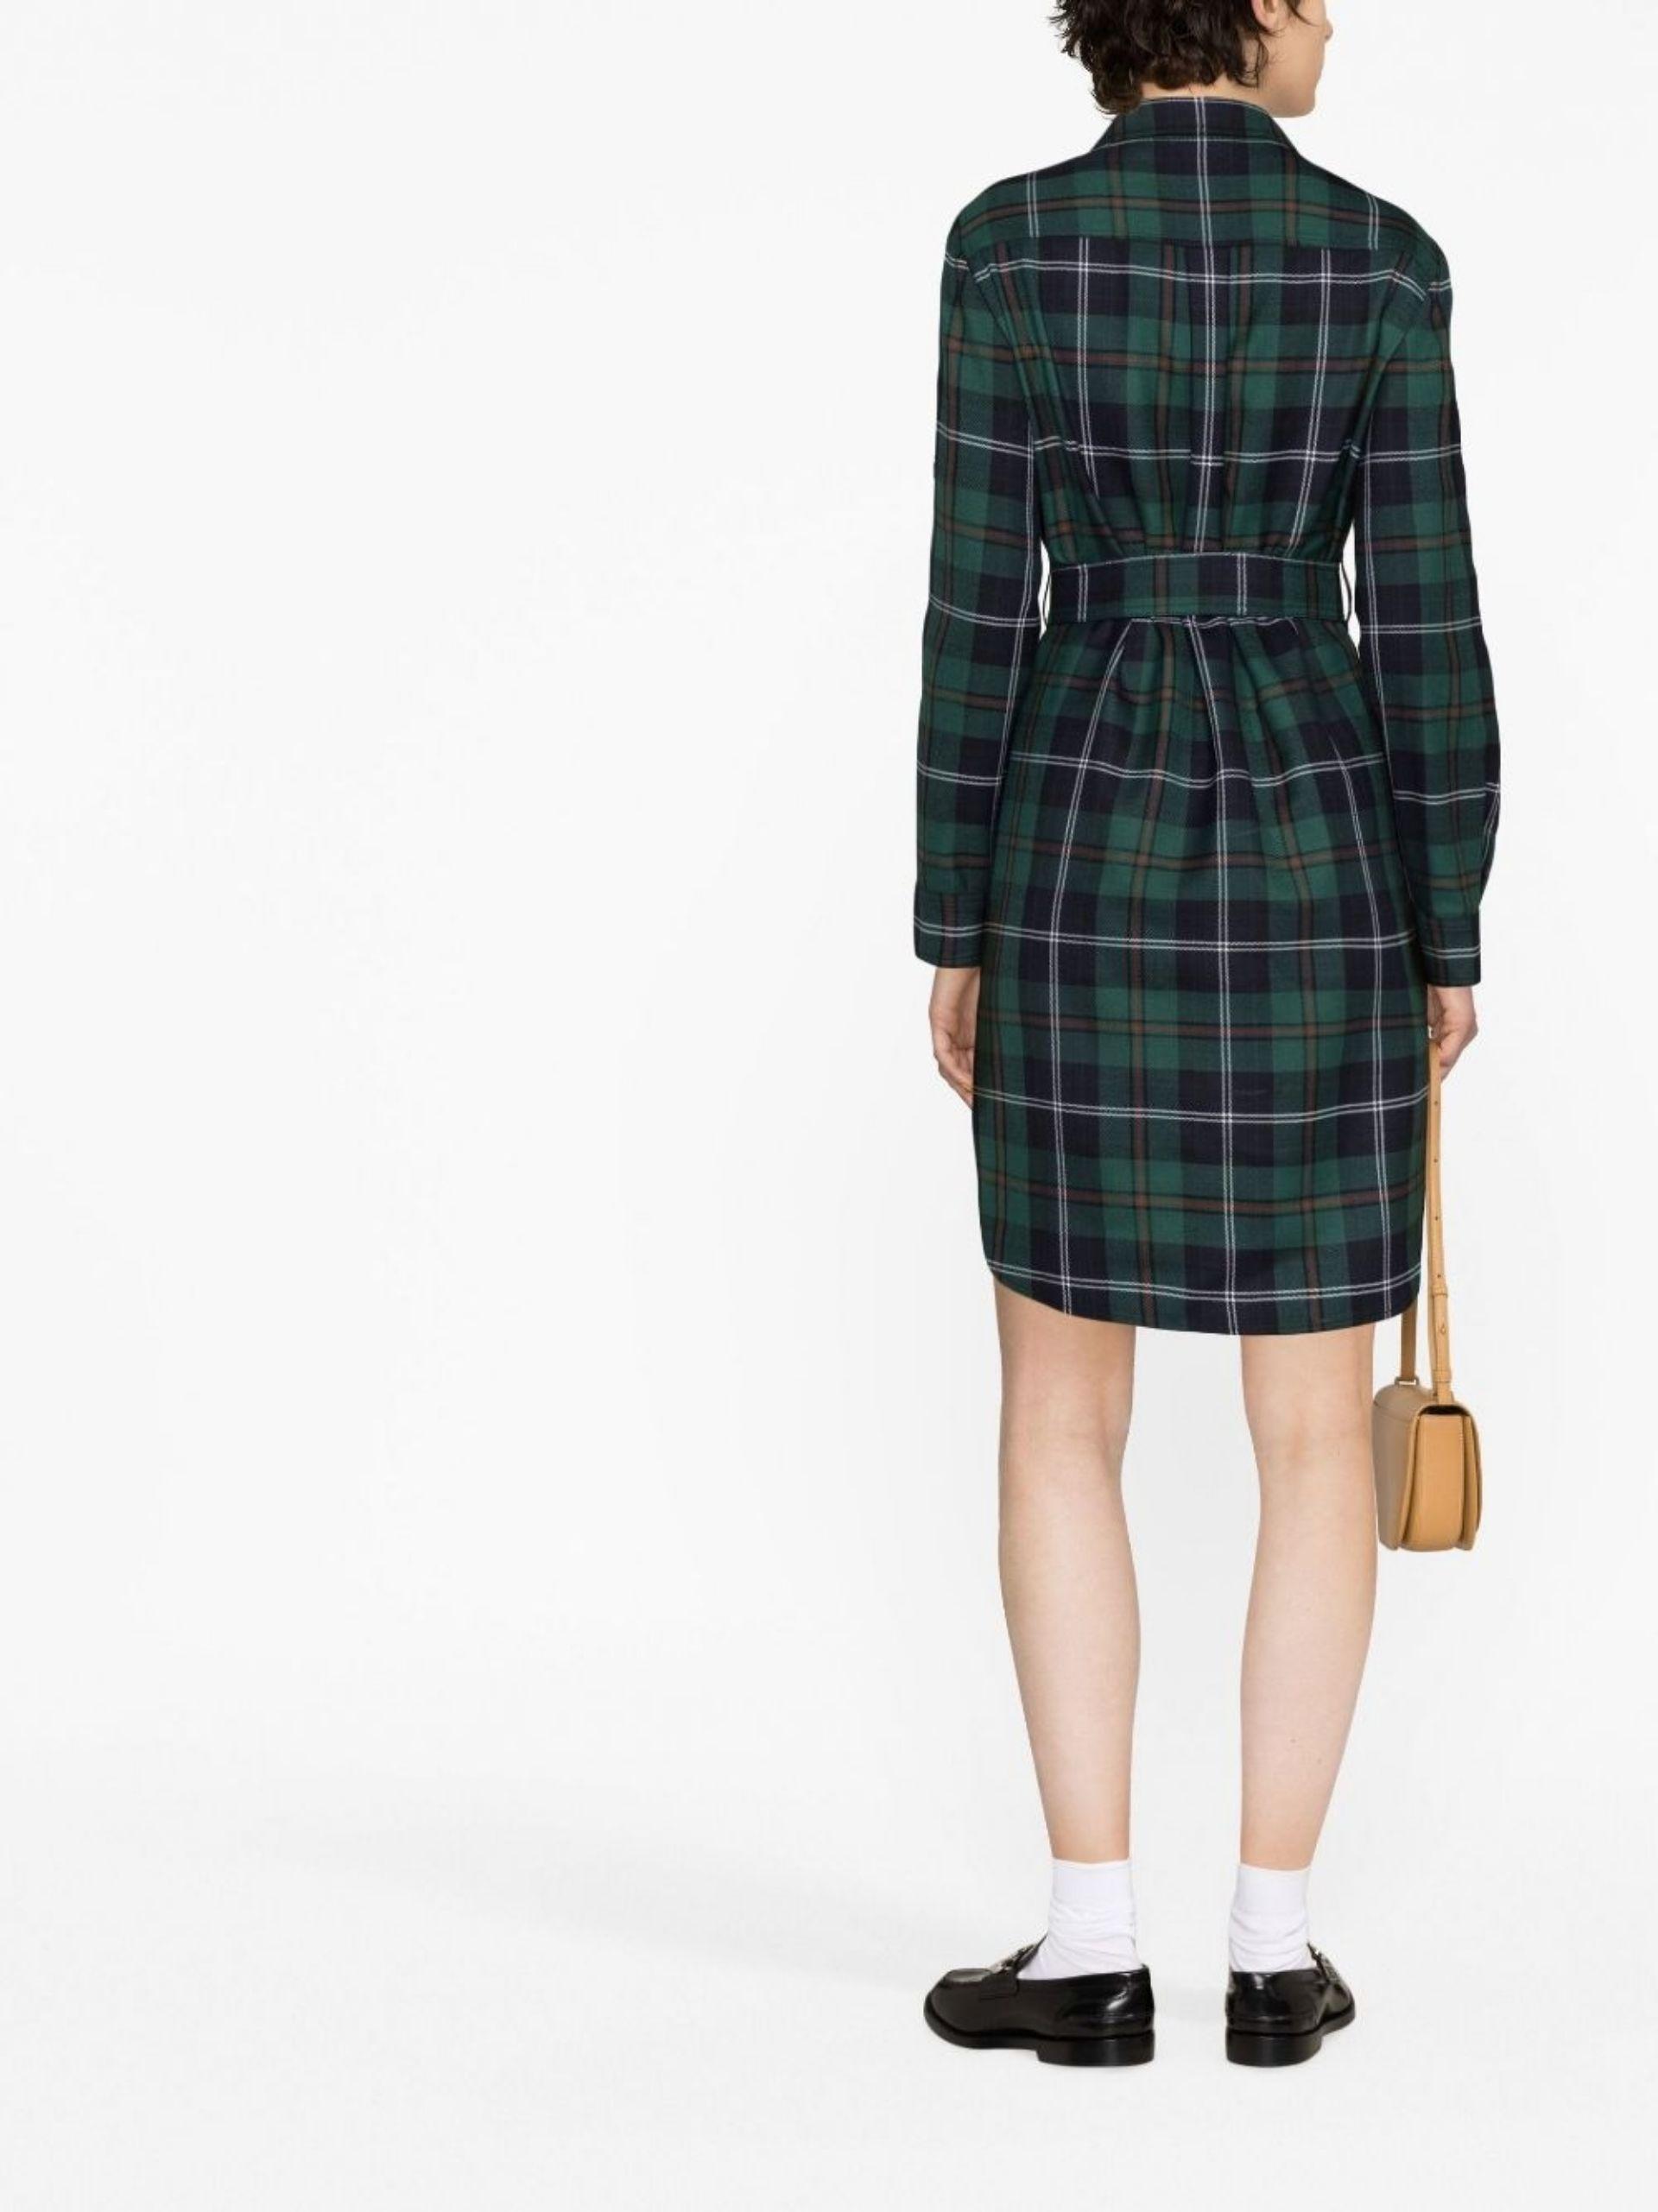 Burberry Women's Giovanna Check Belted Shirtdress